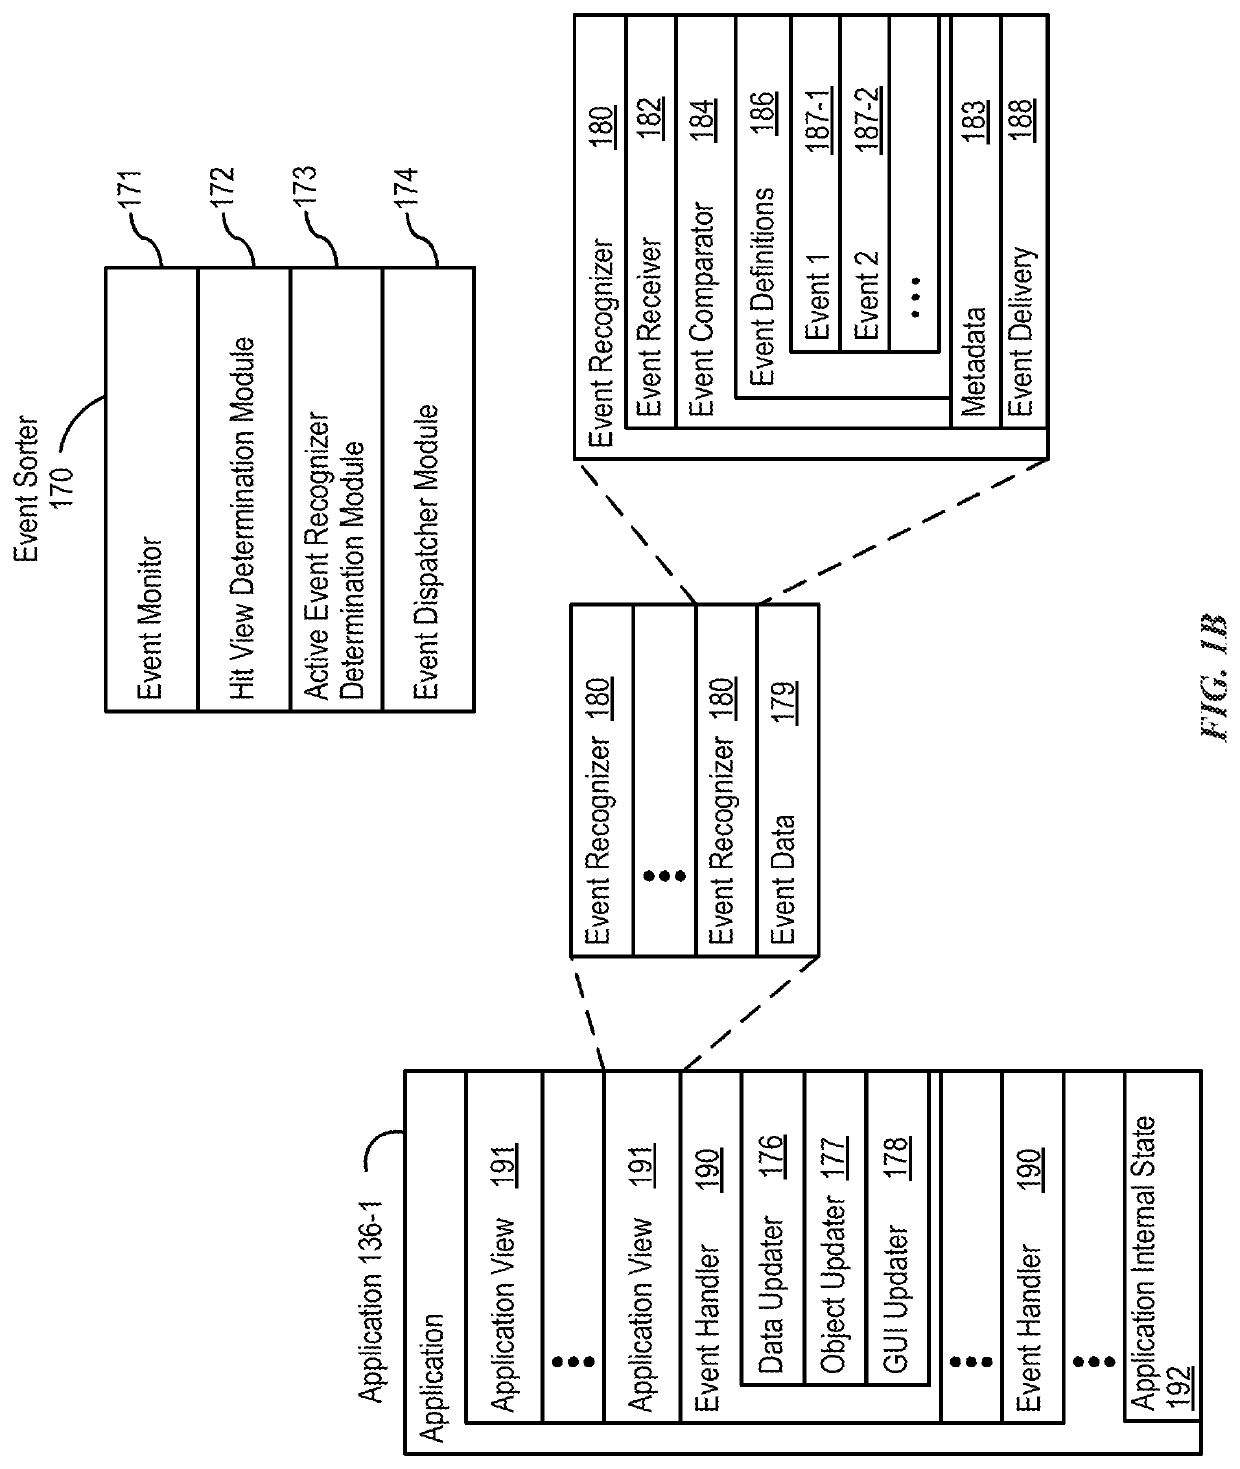 Restricted operation of an electronic device